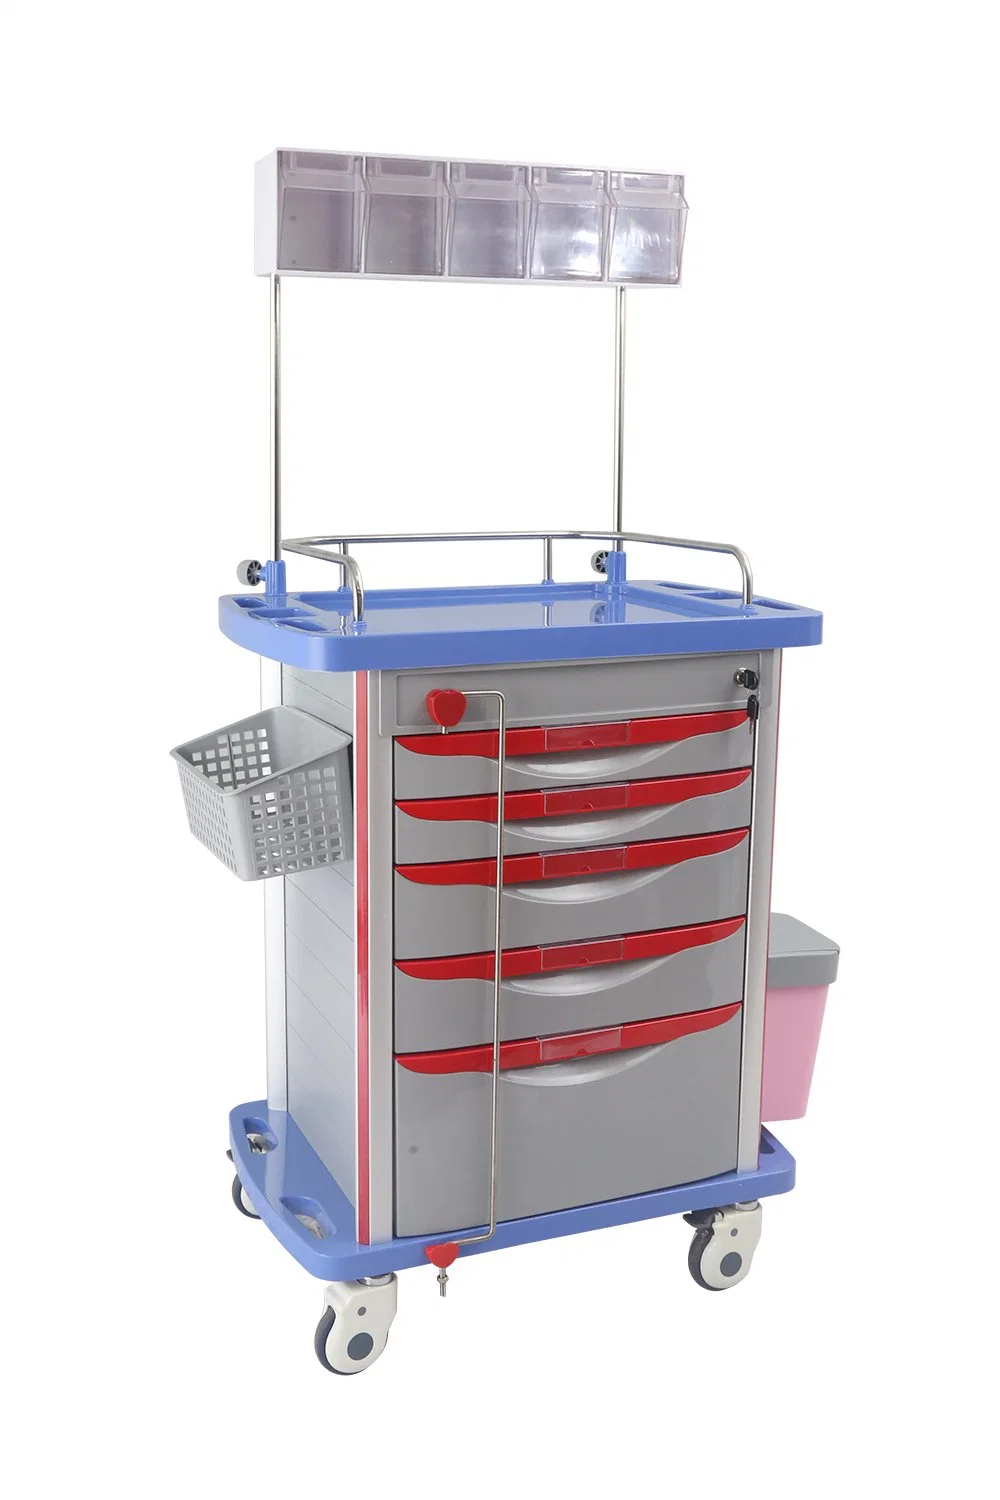 [At750] ABS Anesthesia Trolley and Cart with Drawers for Medical,Emergency,Logistic,Linen,Treatment, Medicine Distribution as Hospital Furniture and Equipment